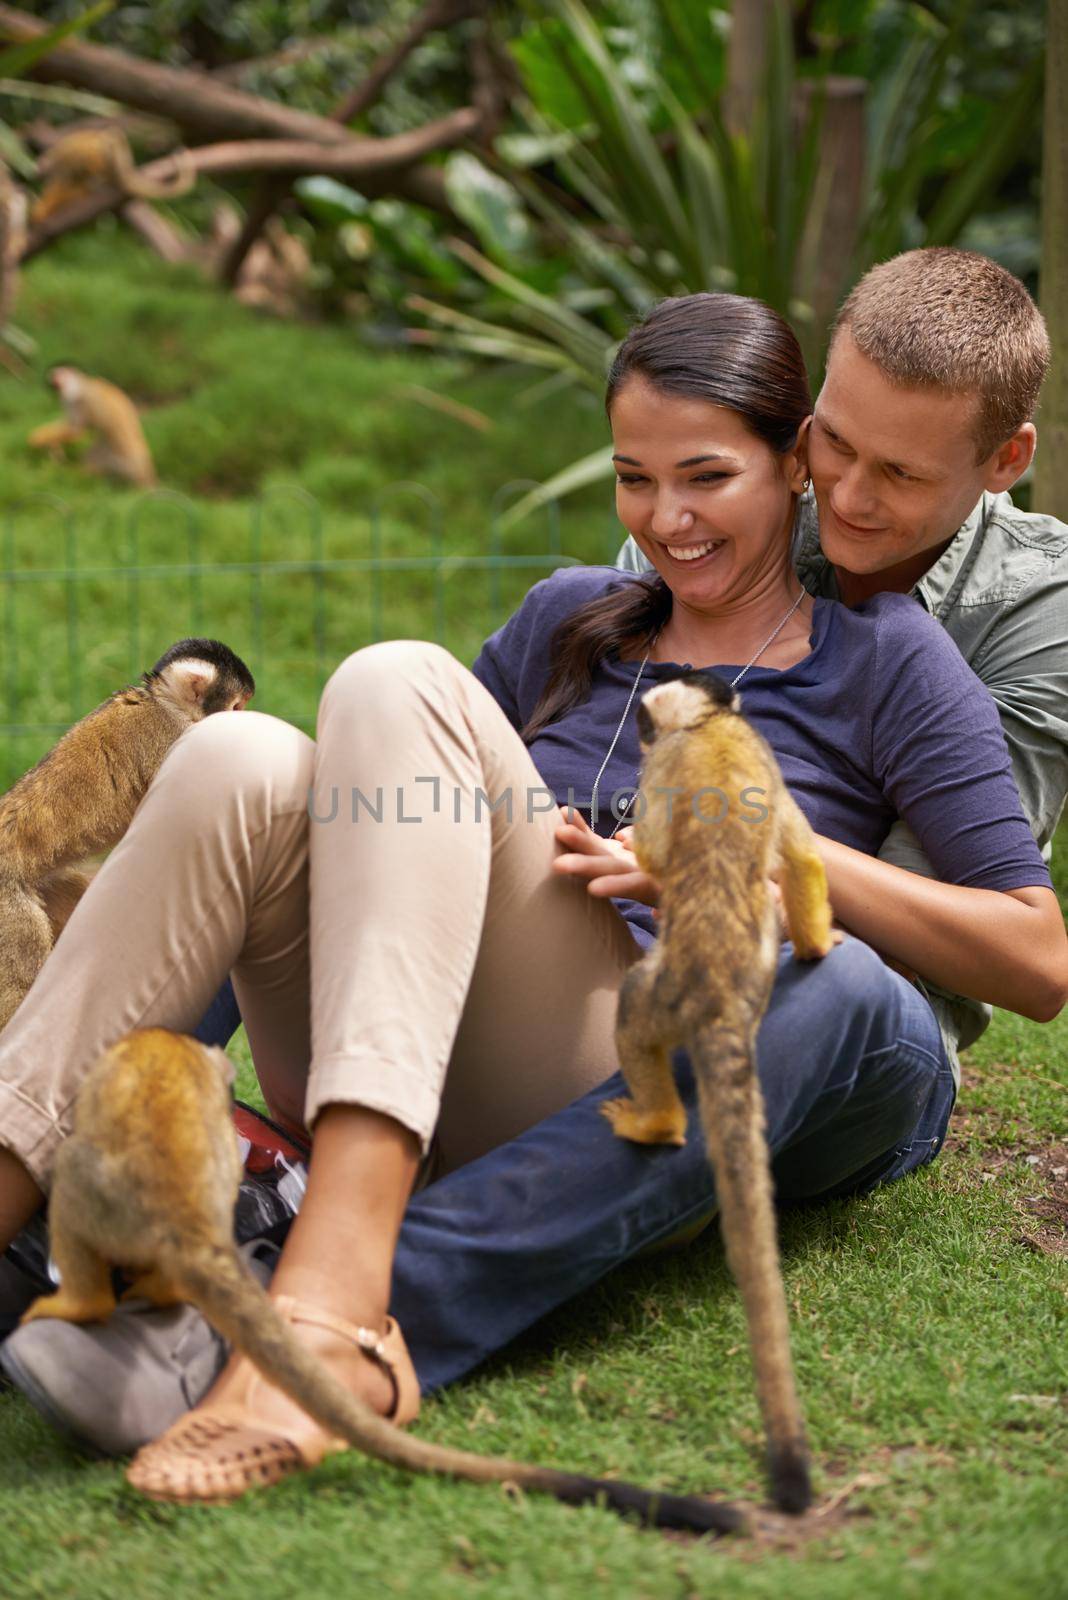 She was in monkey heaven. a young couple spending time at an animal sanctuary